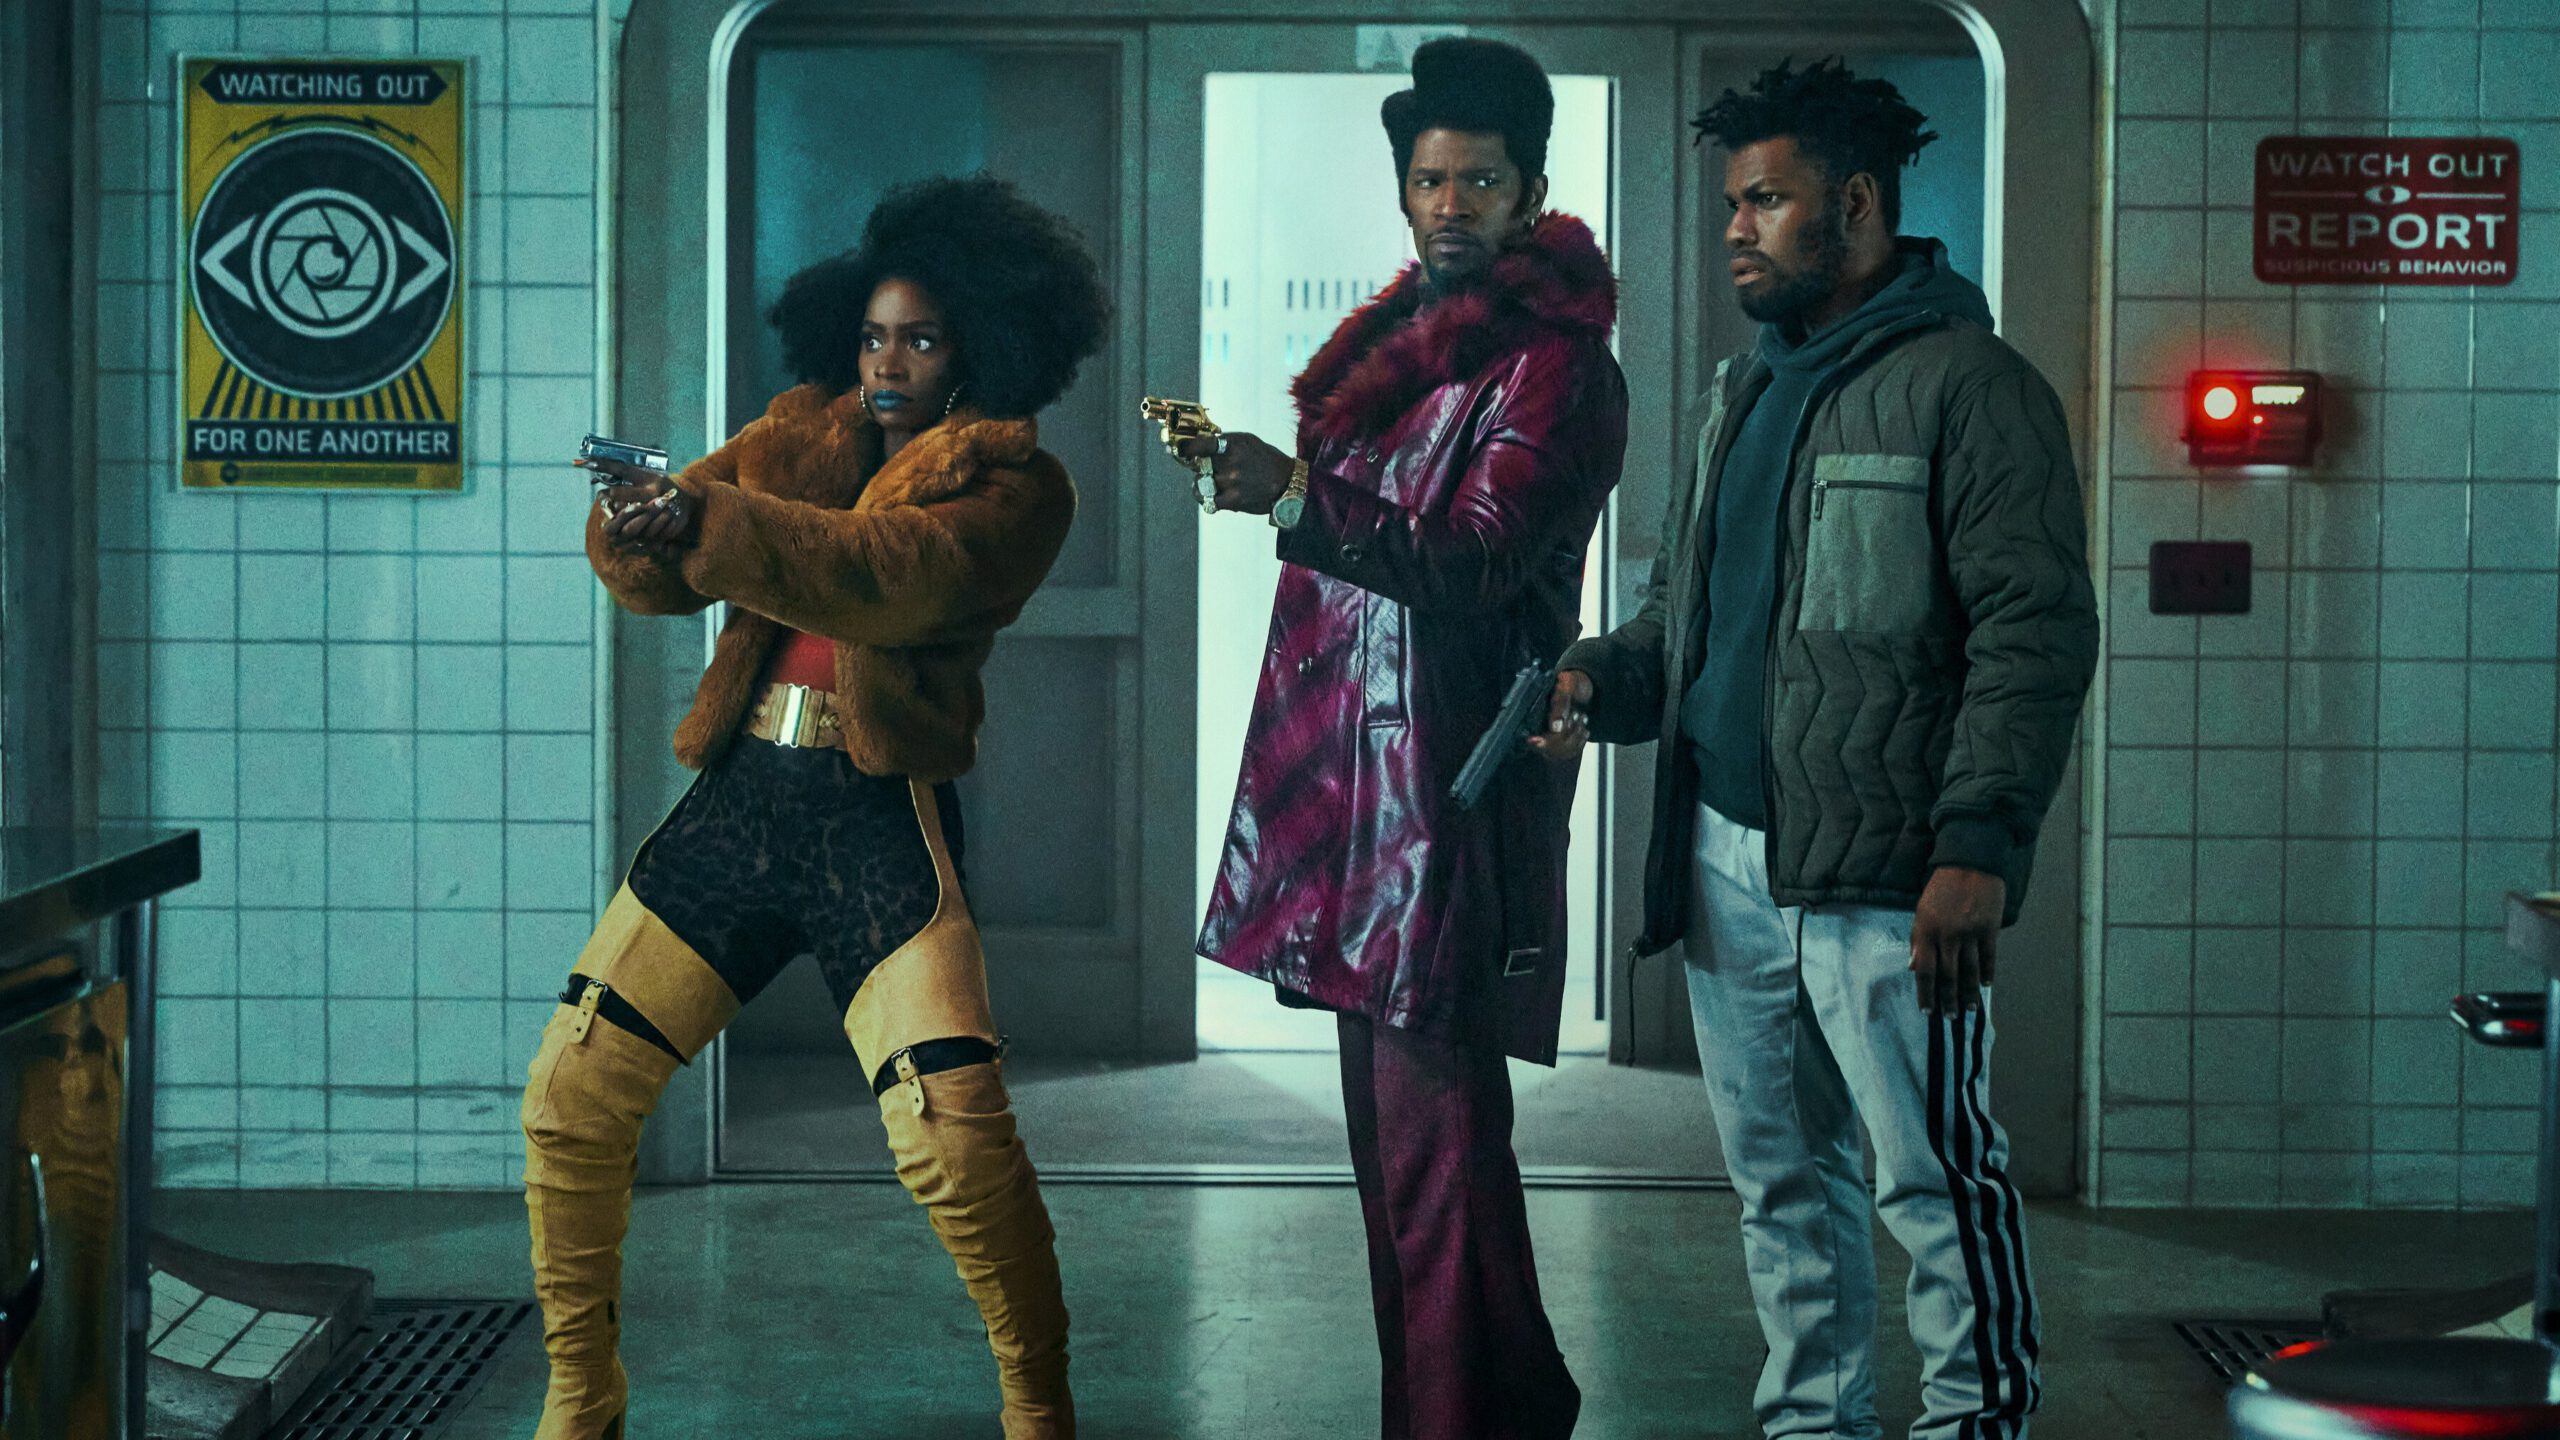 Three adults wearing colorful, '70s style clothes barge into a basement with guns. 